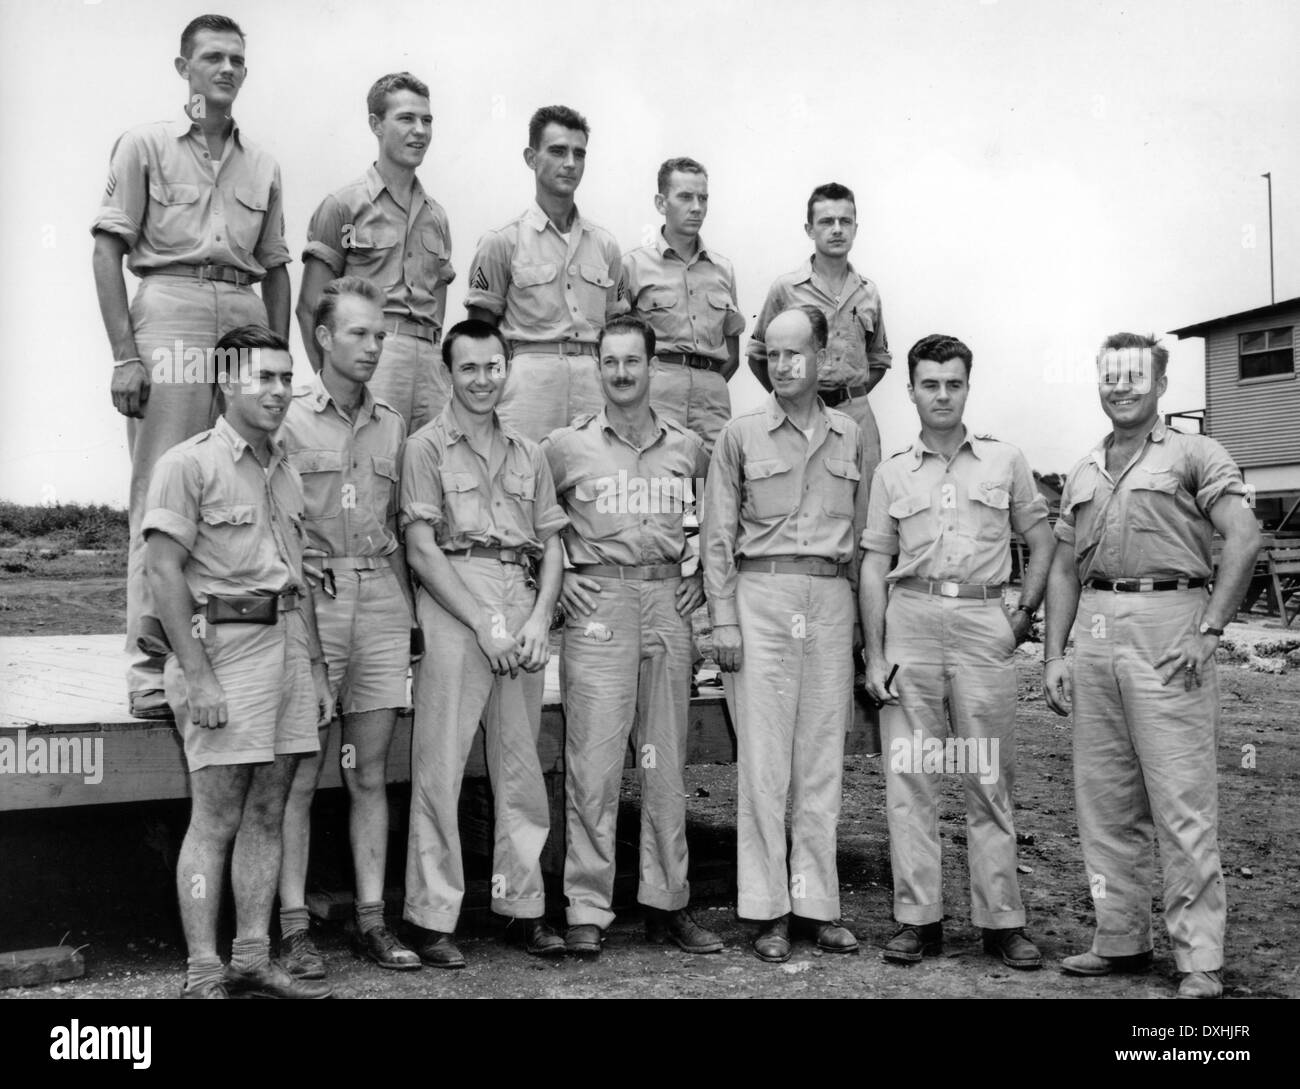 ENOLA GAY Crew of the B29 Superfortress after dropping the first atomic bomb on Hiroshima on 6 August 1945. See Description belo Stock Photo